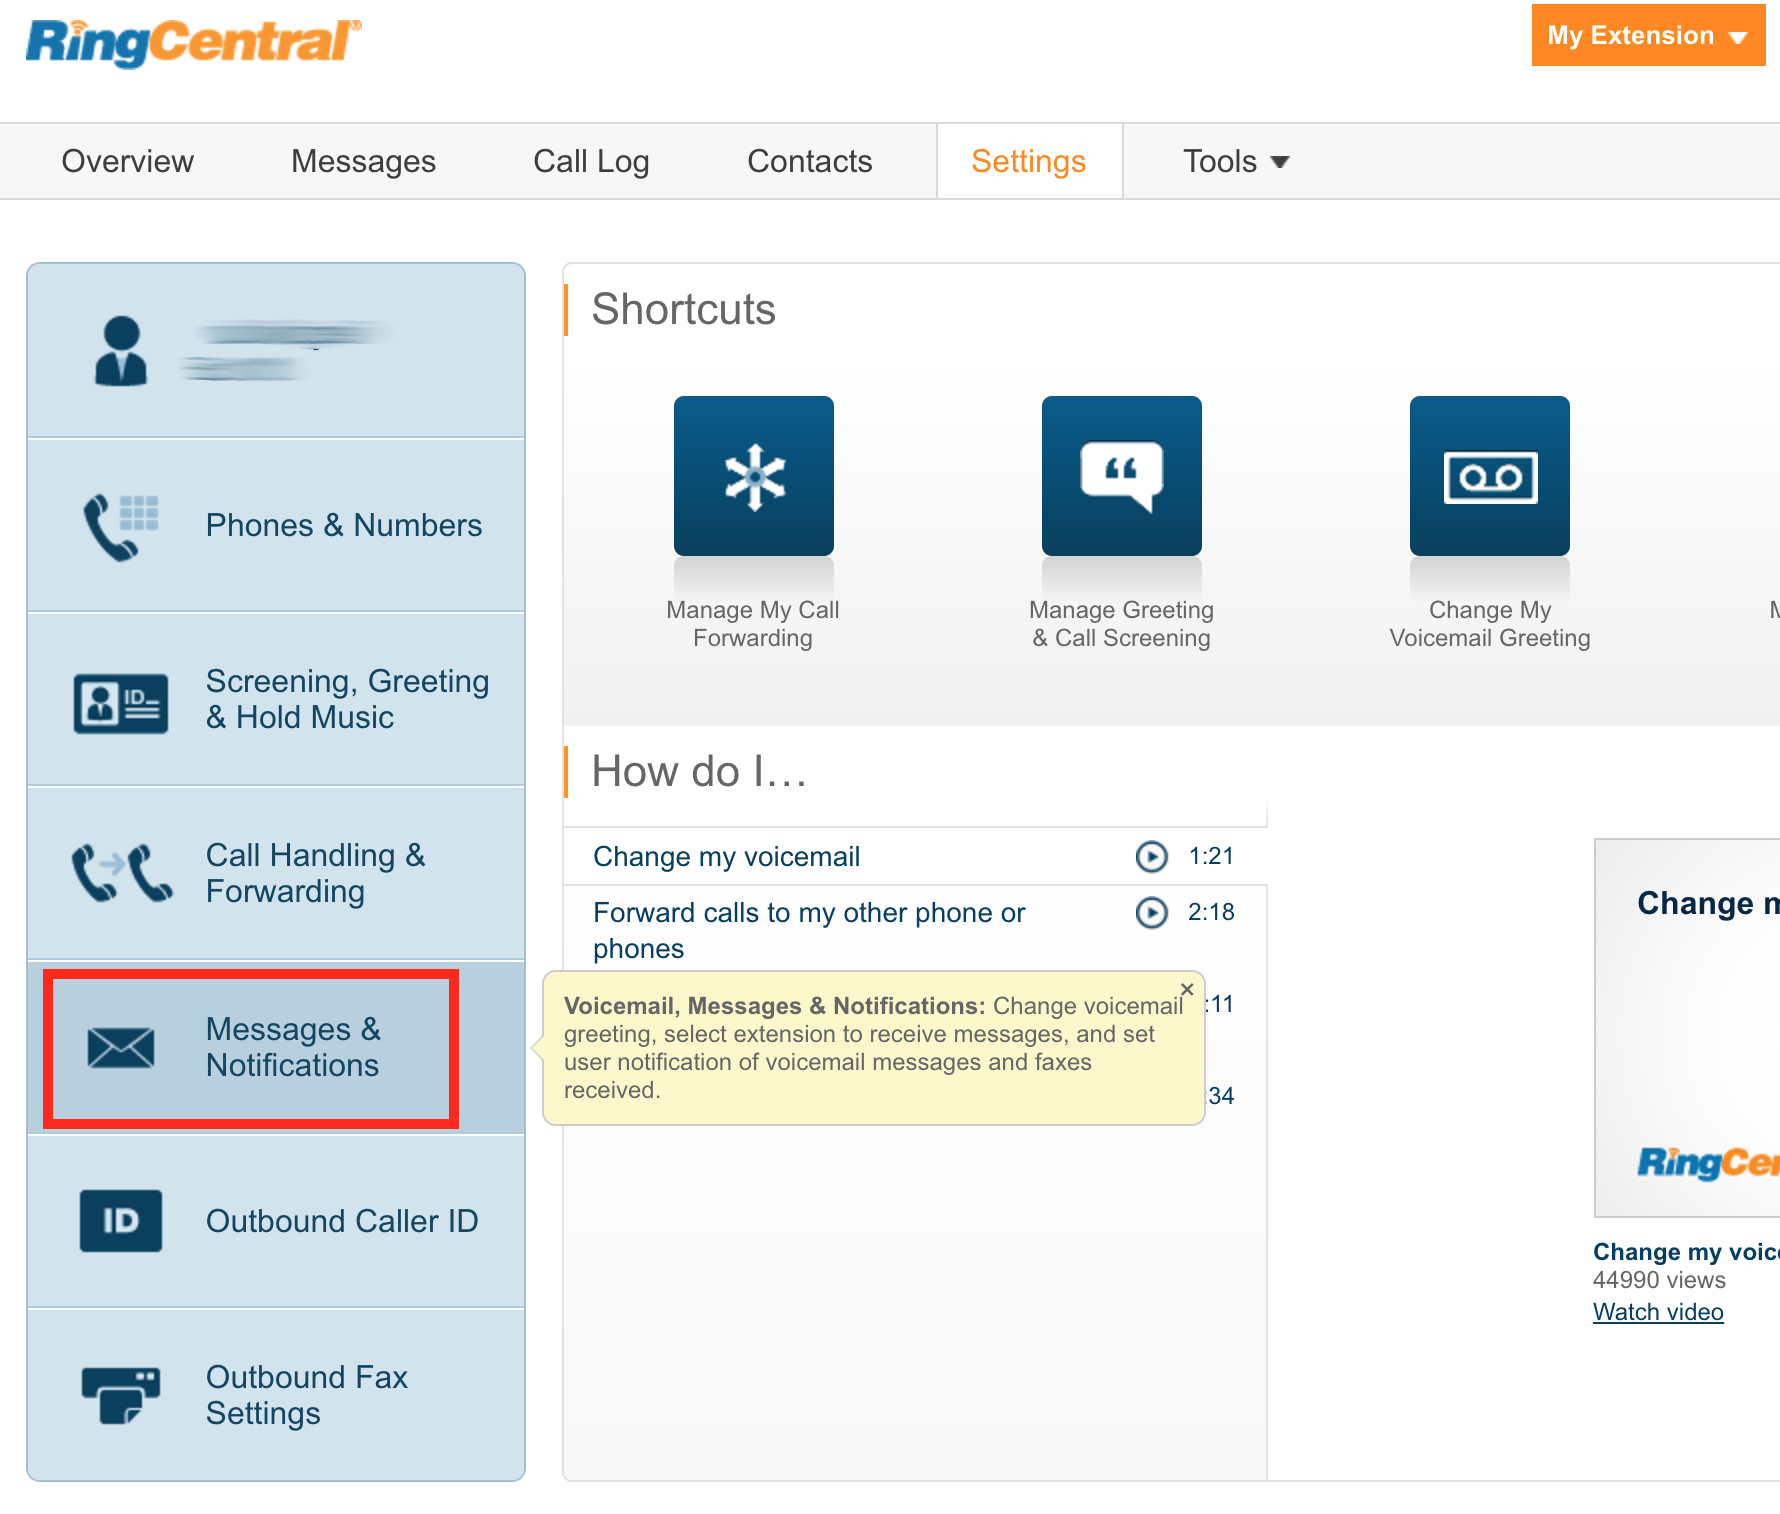 RingCentral Messages and Notifications